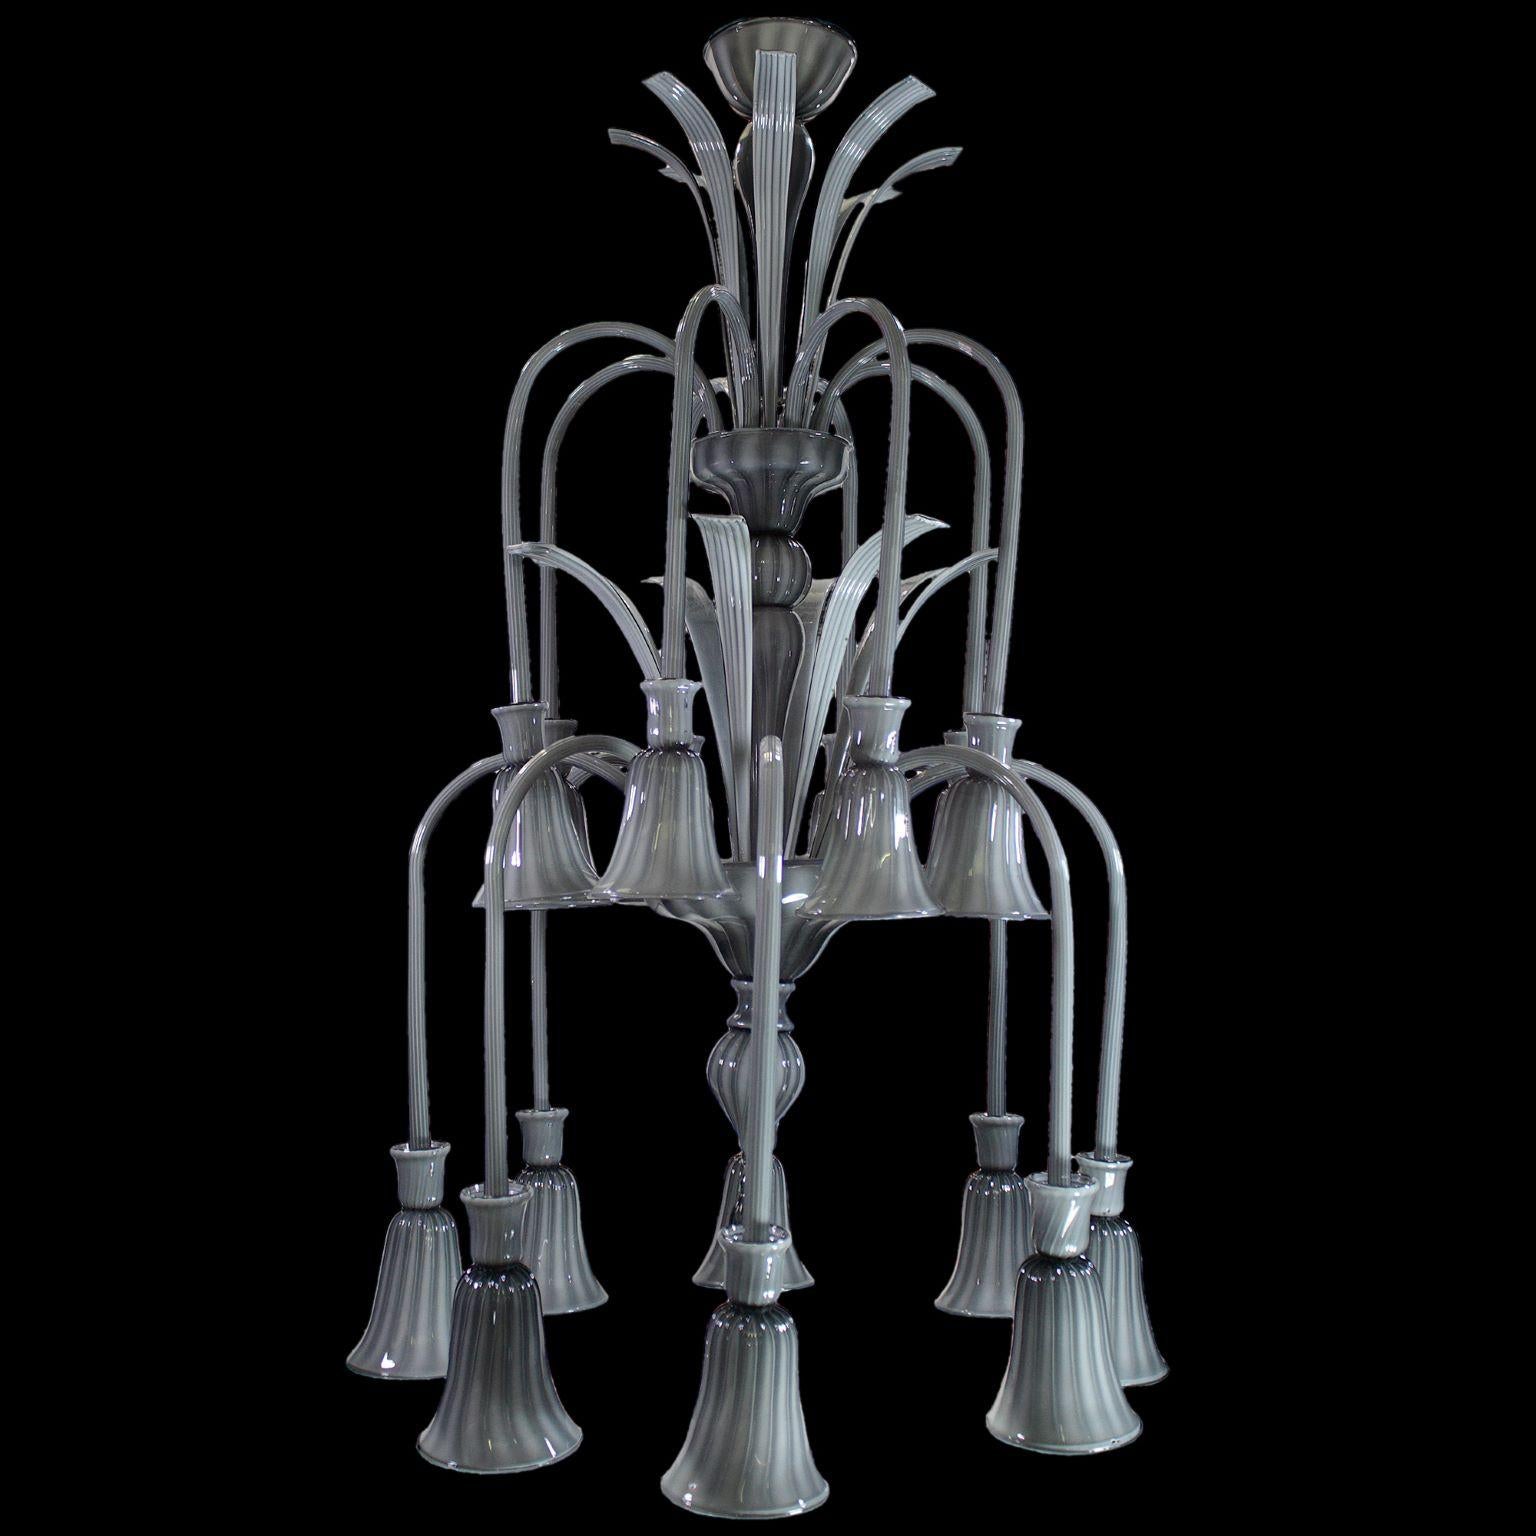 21st century chandelier 16 lights in encased grey Murano glass by Multiforme.

The Murano chandeliers collection Ritz is an explicit tribute to the Art Deco style. The whole composition is characterized by a series of elements typical of that